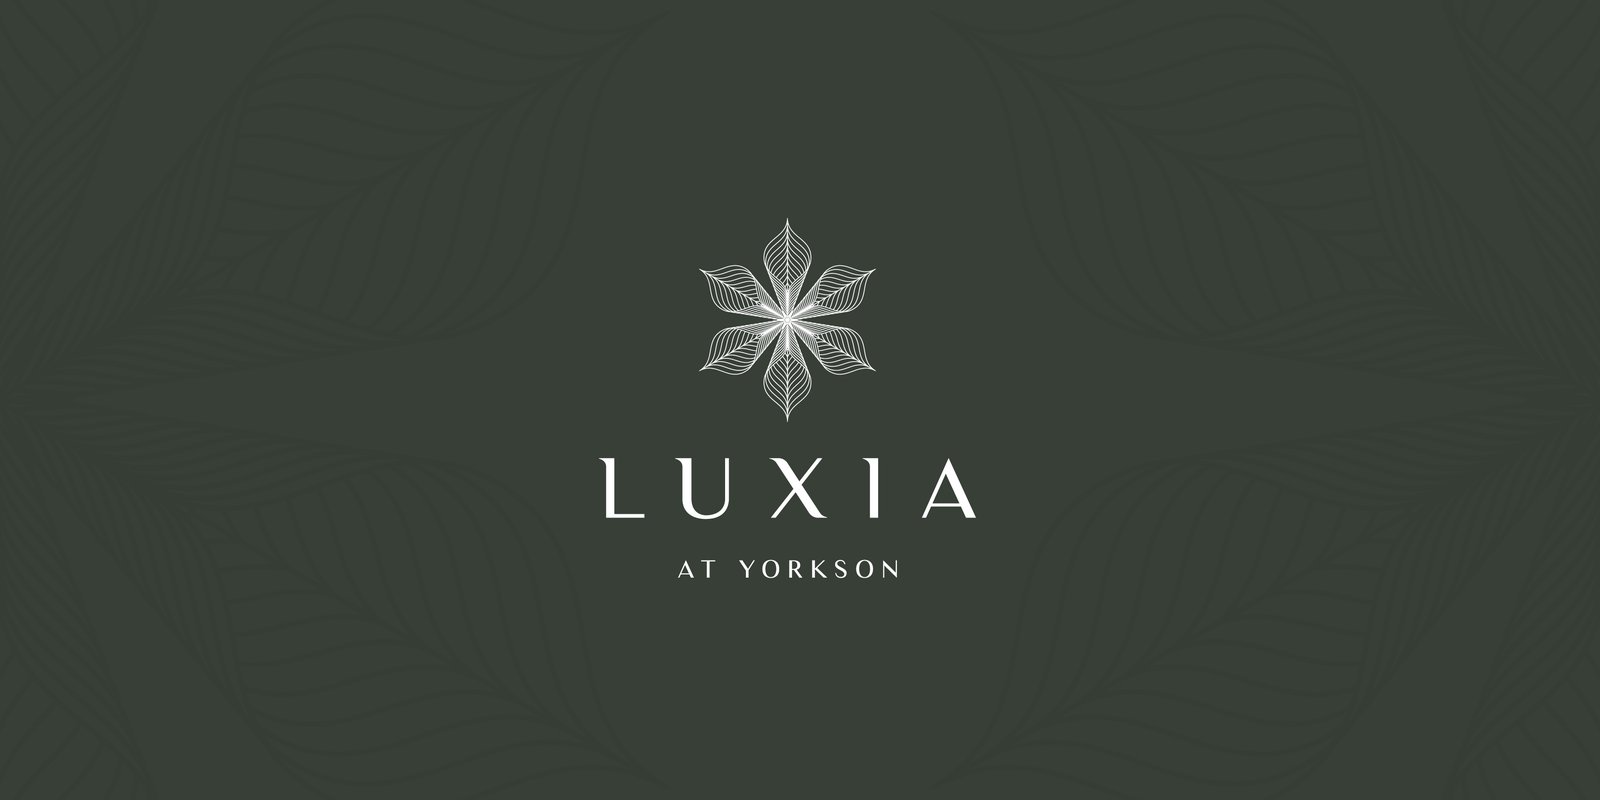 LUXIA AT YORKSON